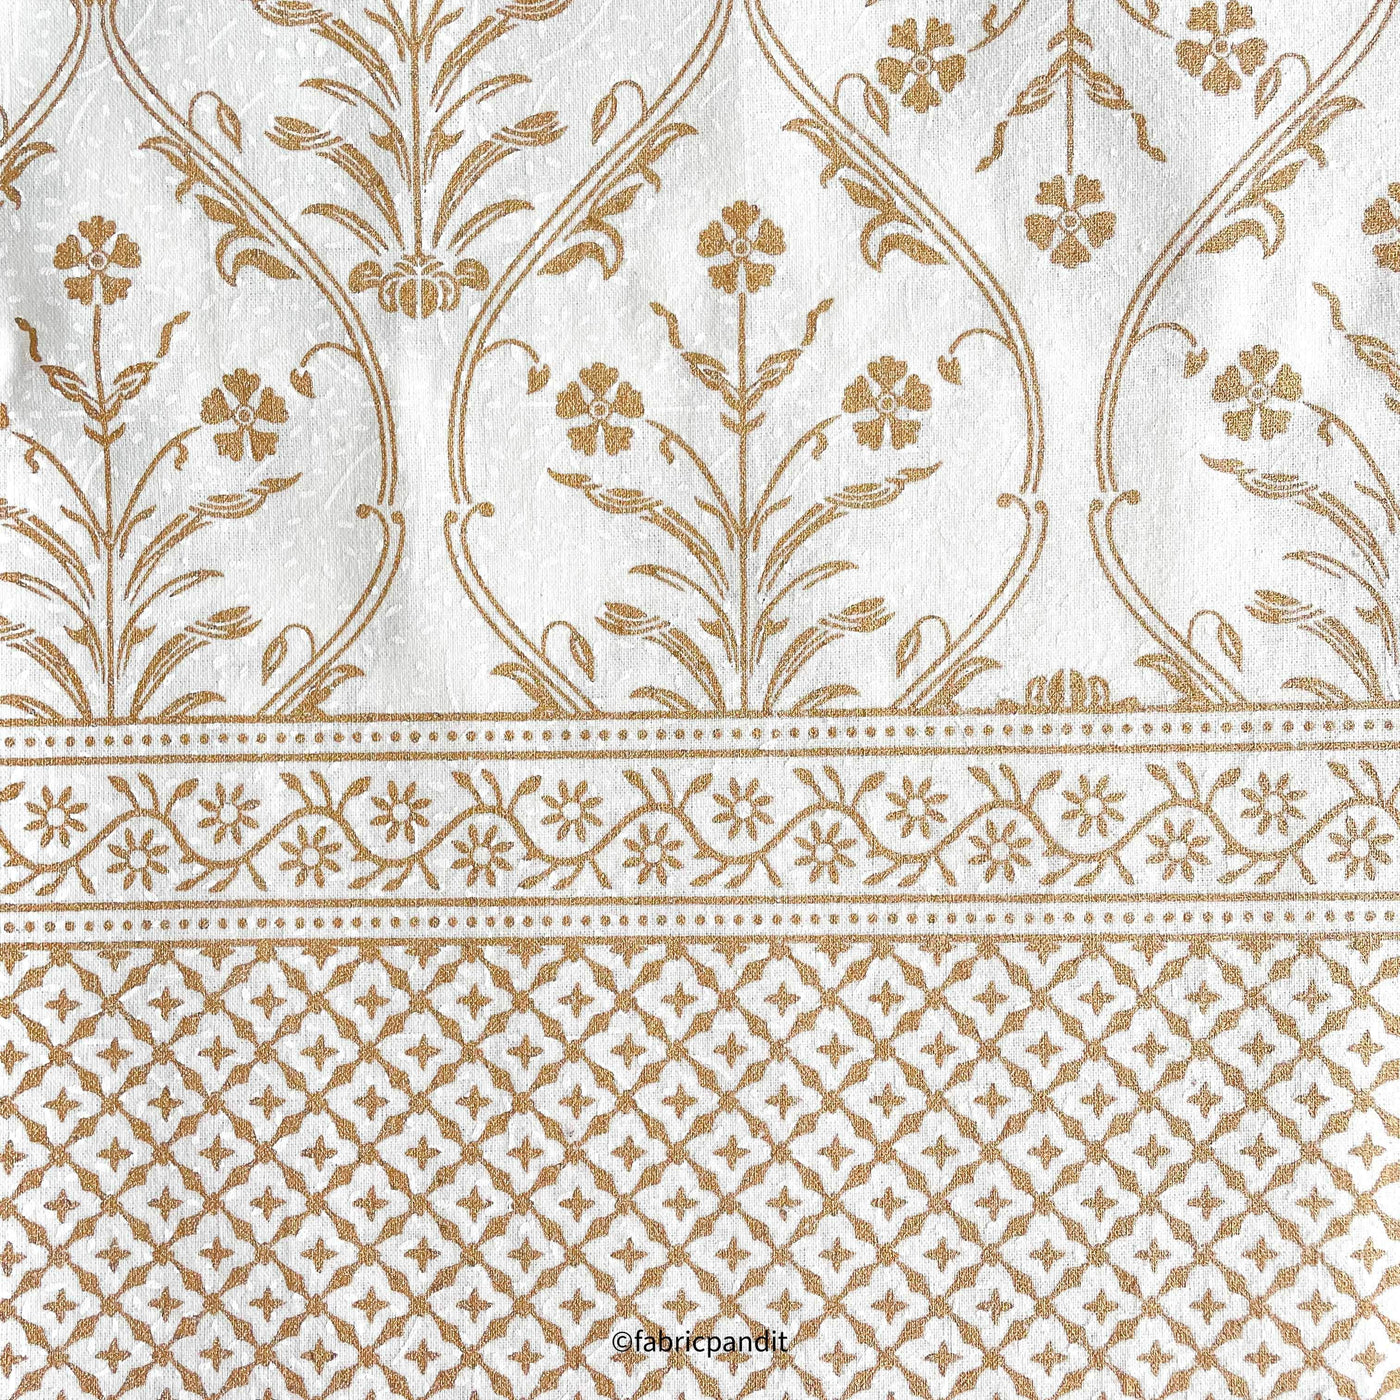 Fabric Pandit Fabric White & Gold Mughal Floral Hand Block Printed Pure Cotton Table Cover